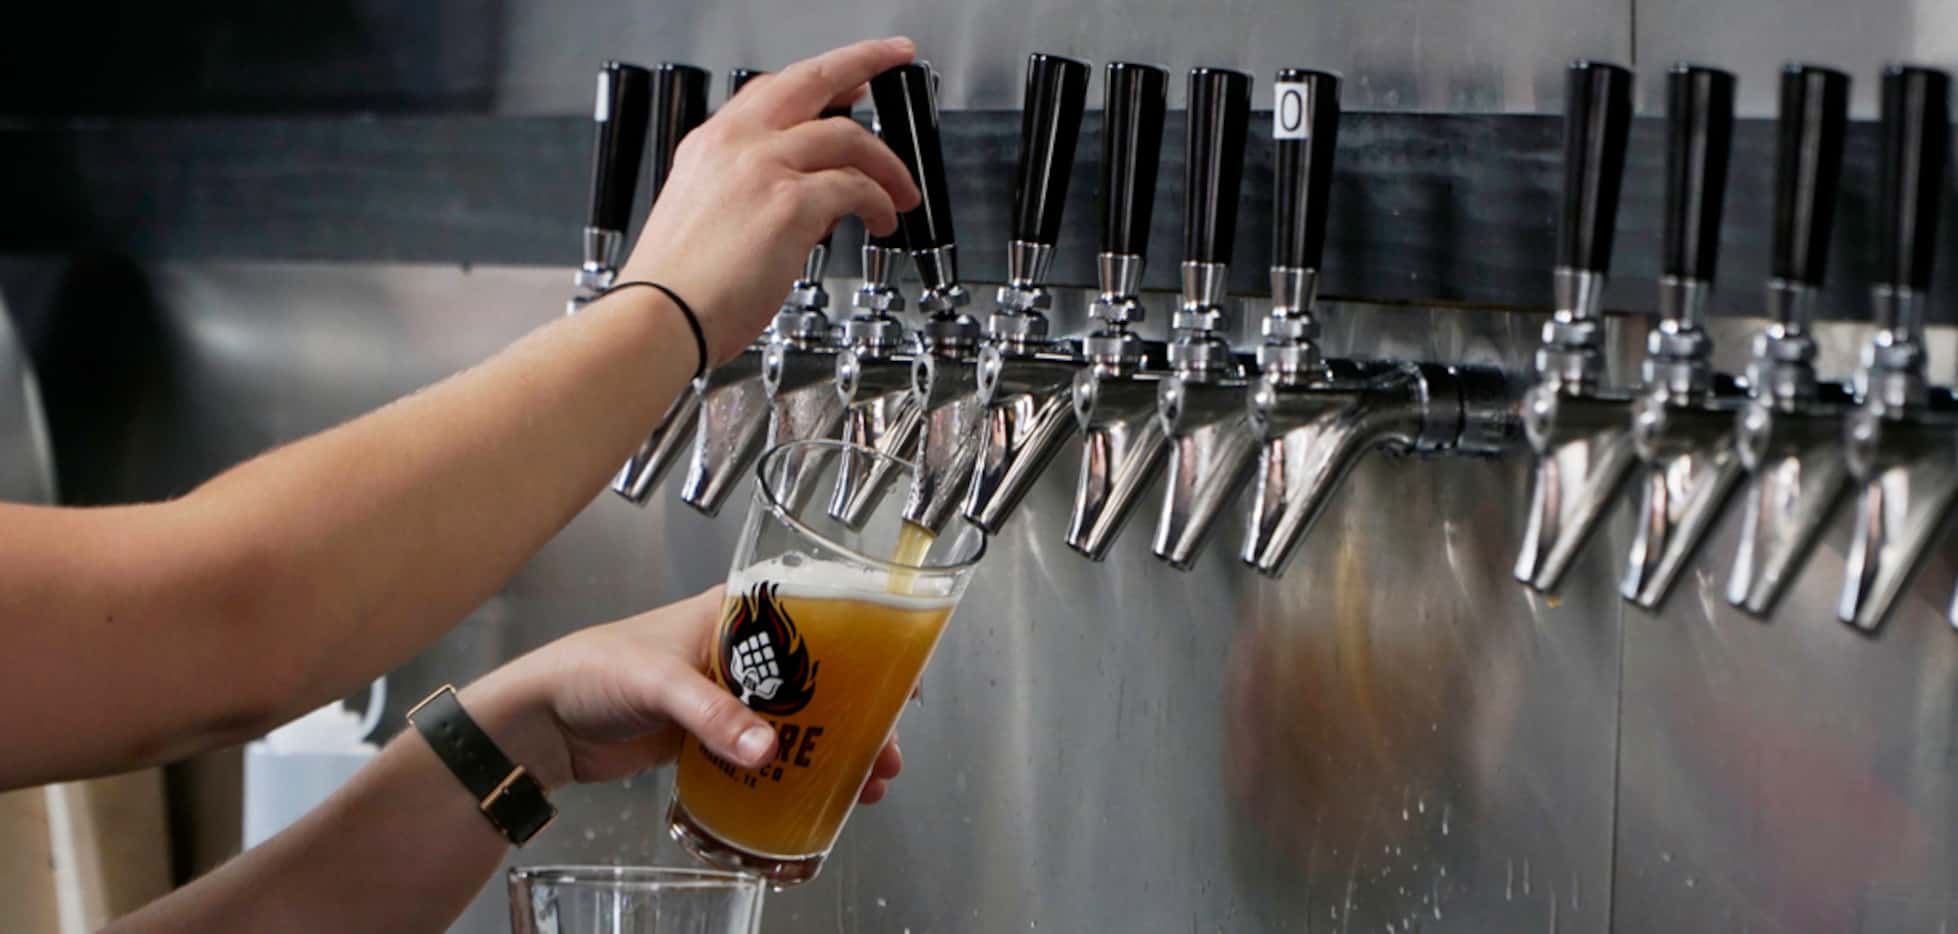 The beer was flowing during the grand opening of Soul Fire Brewing Co. in Roanoke, Texas on...